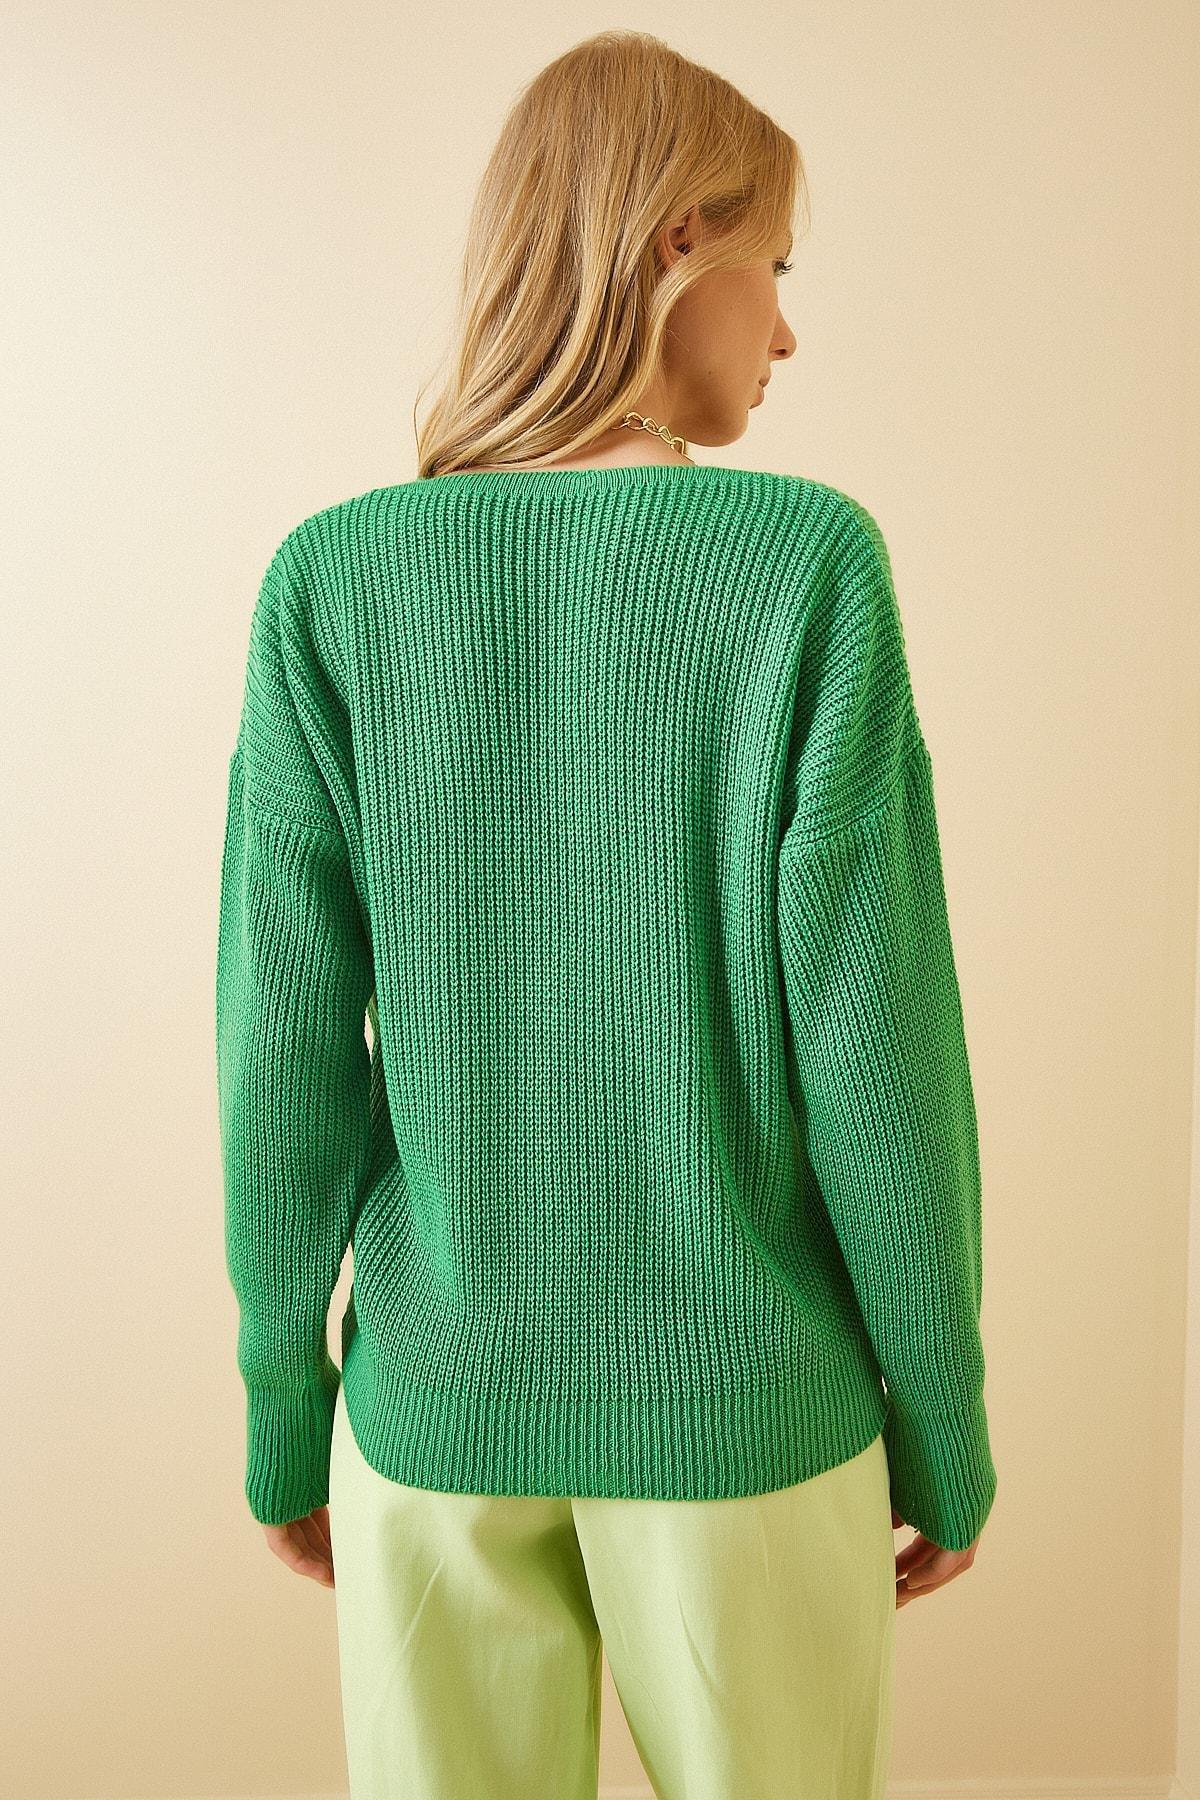 Happiness Istanbul - Green V-Neck Buttoned Cardigan